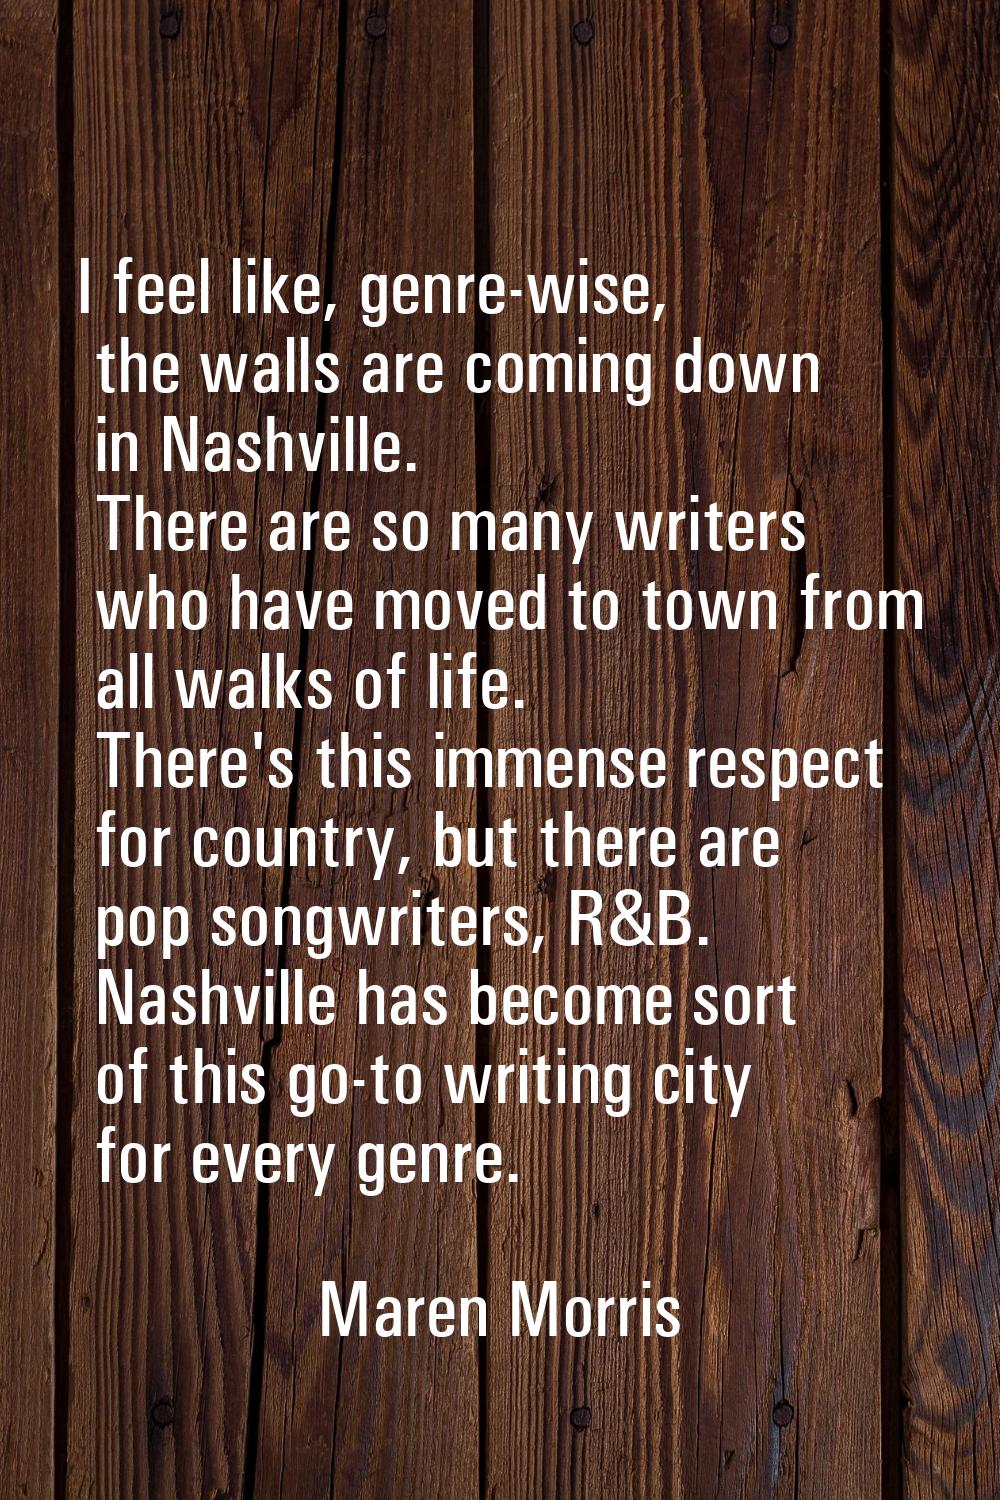 I feel like, genre-wise, the walls are coming down in Nashville. There are so many writers who have